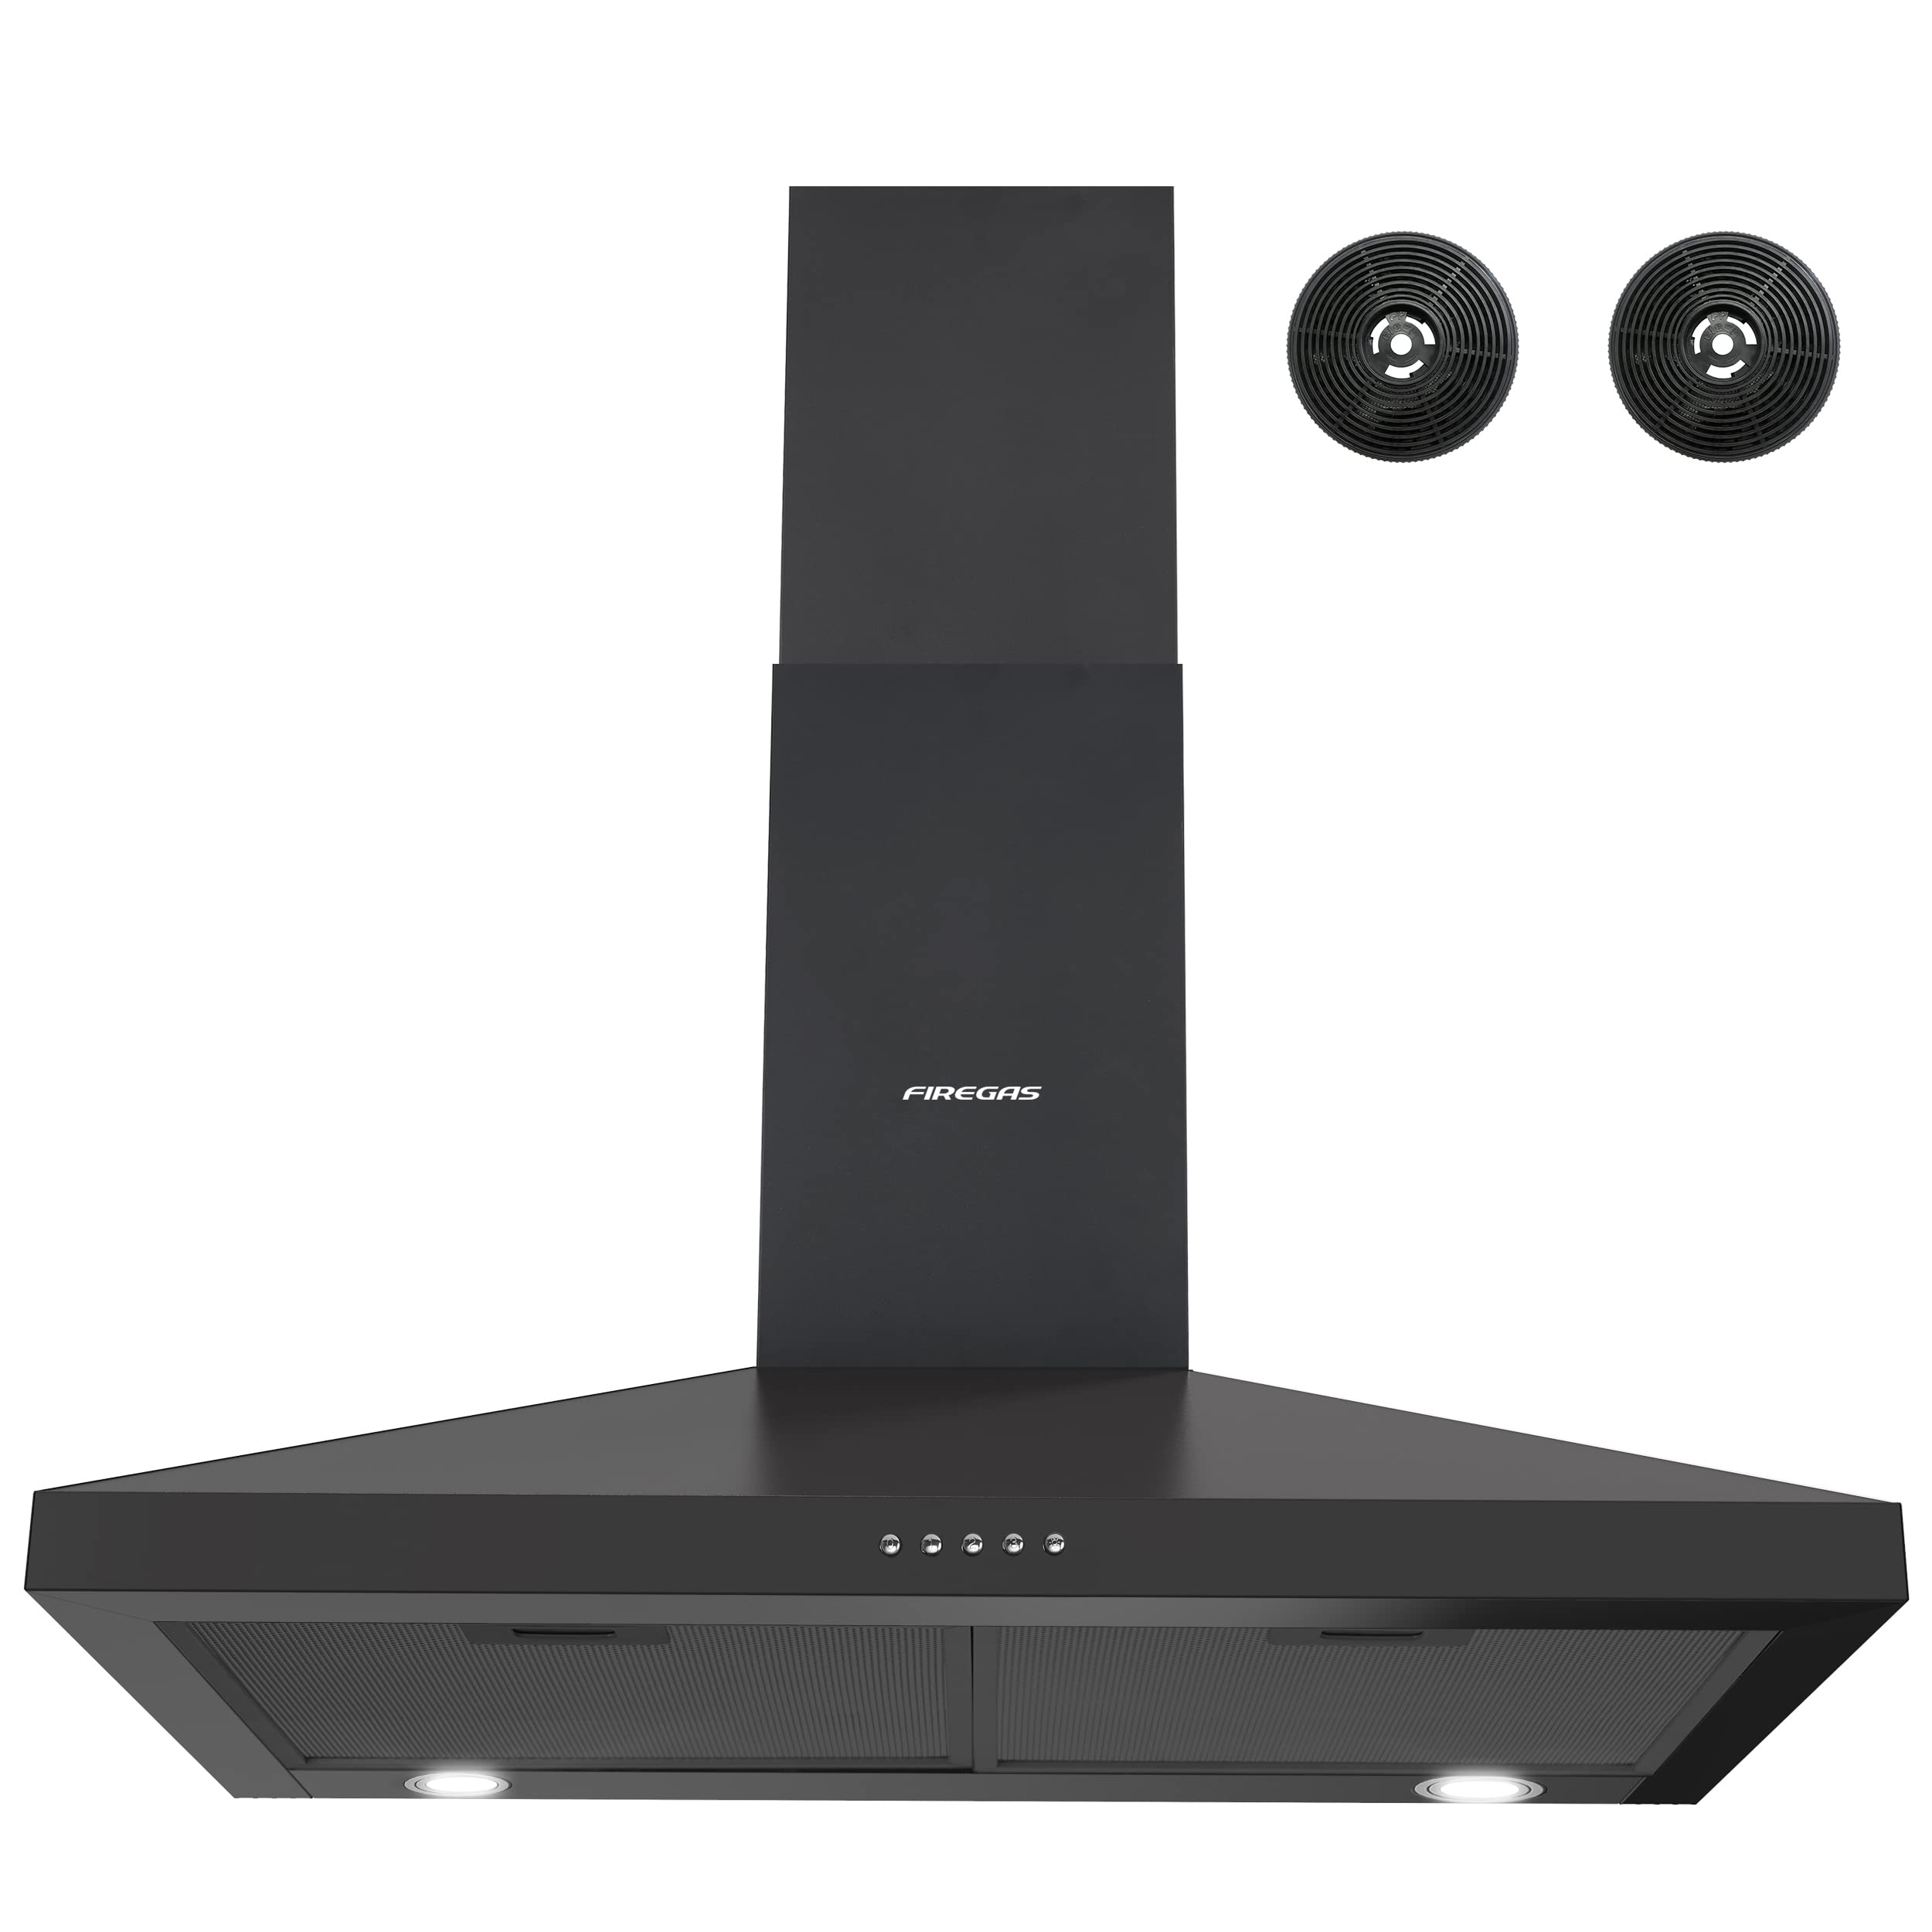 FIREgAS Black Range Hood 30 inch, Black Stainless Range Hood 30 inch with 3 Speed Exhaust Fan, Push Button, LEDs, chimney Style 